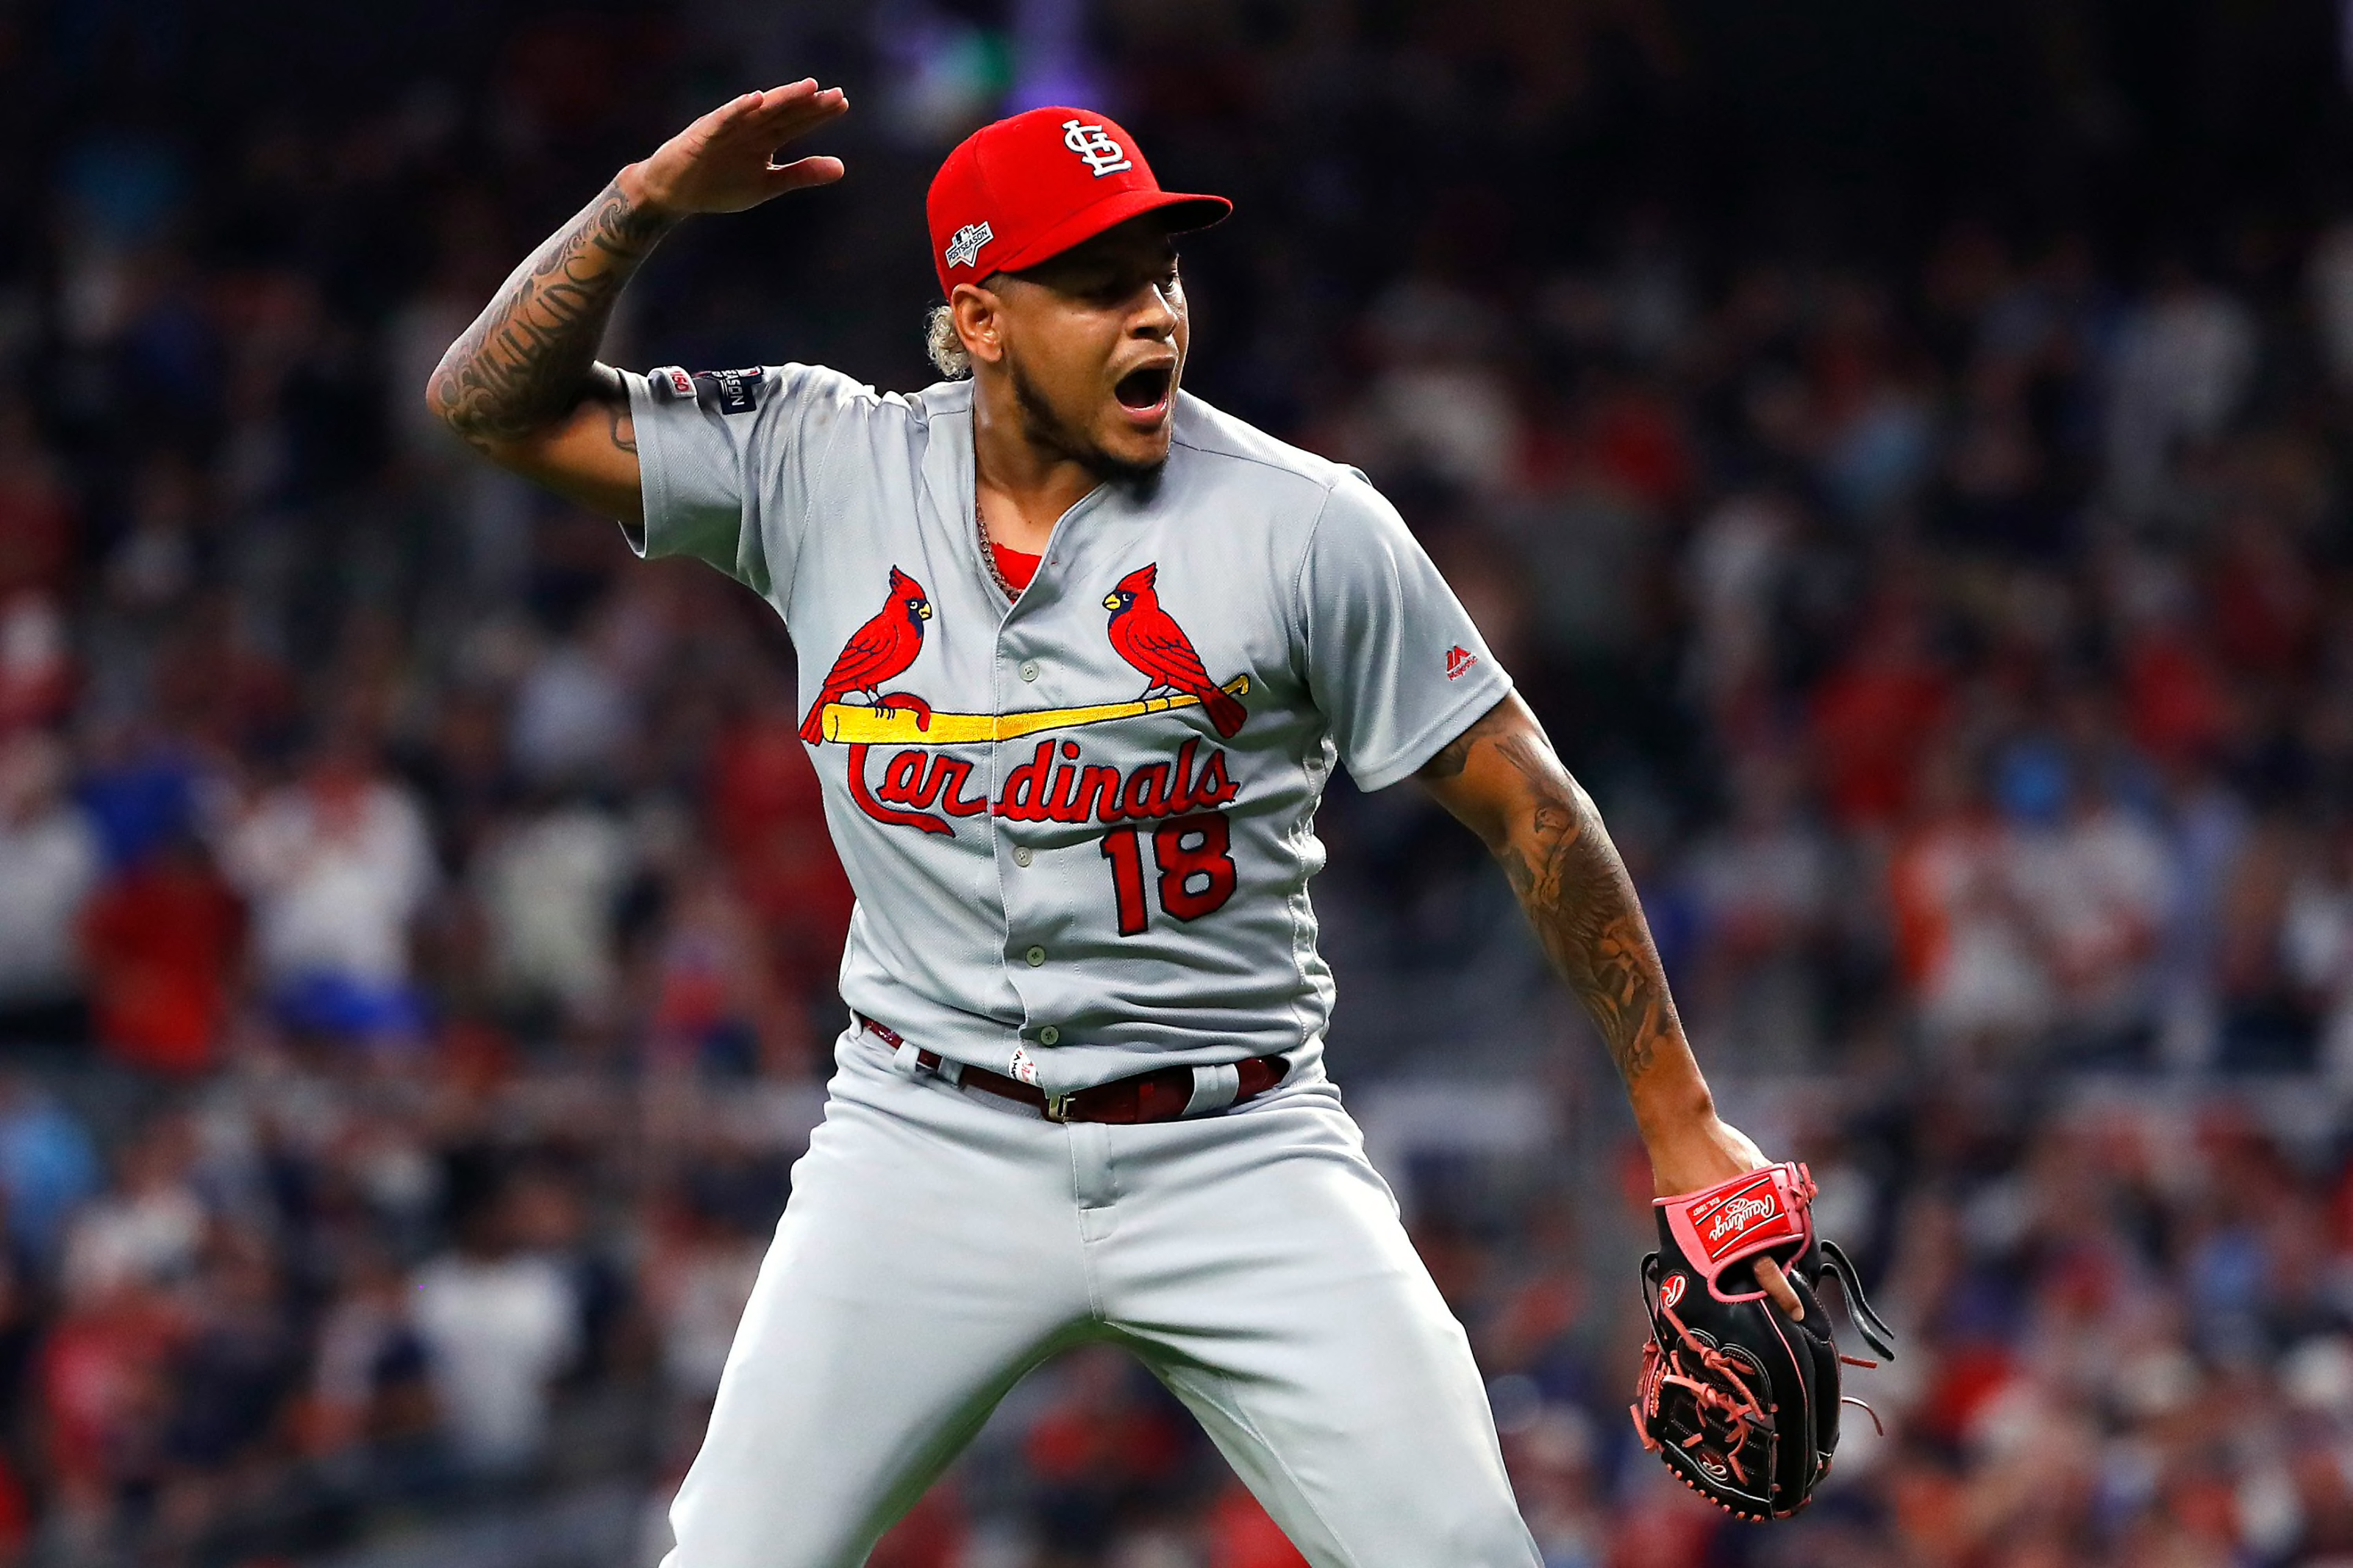 Could these be their last games as a St. Louis Cardinals Player? - Page 2